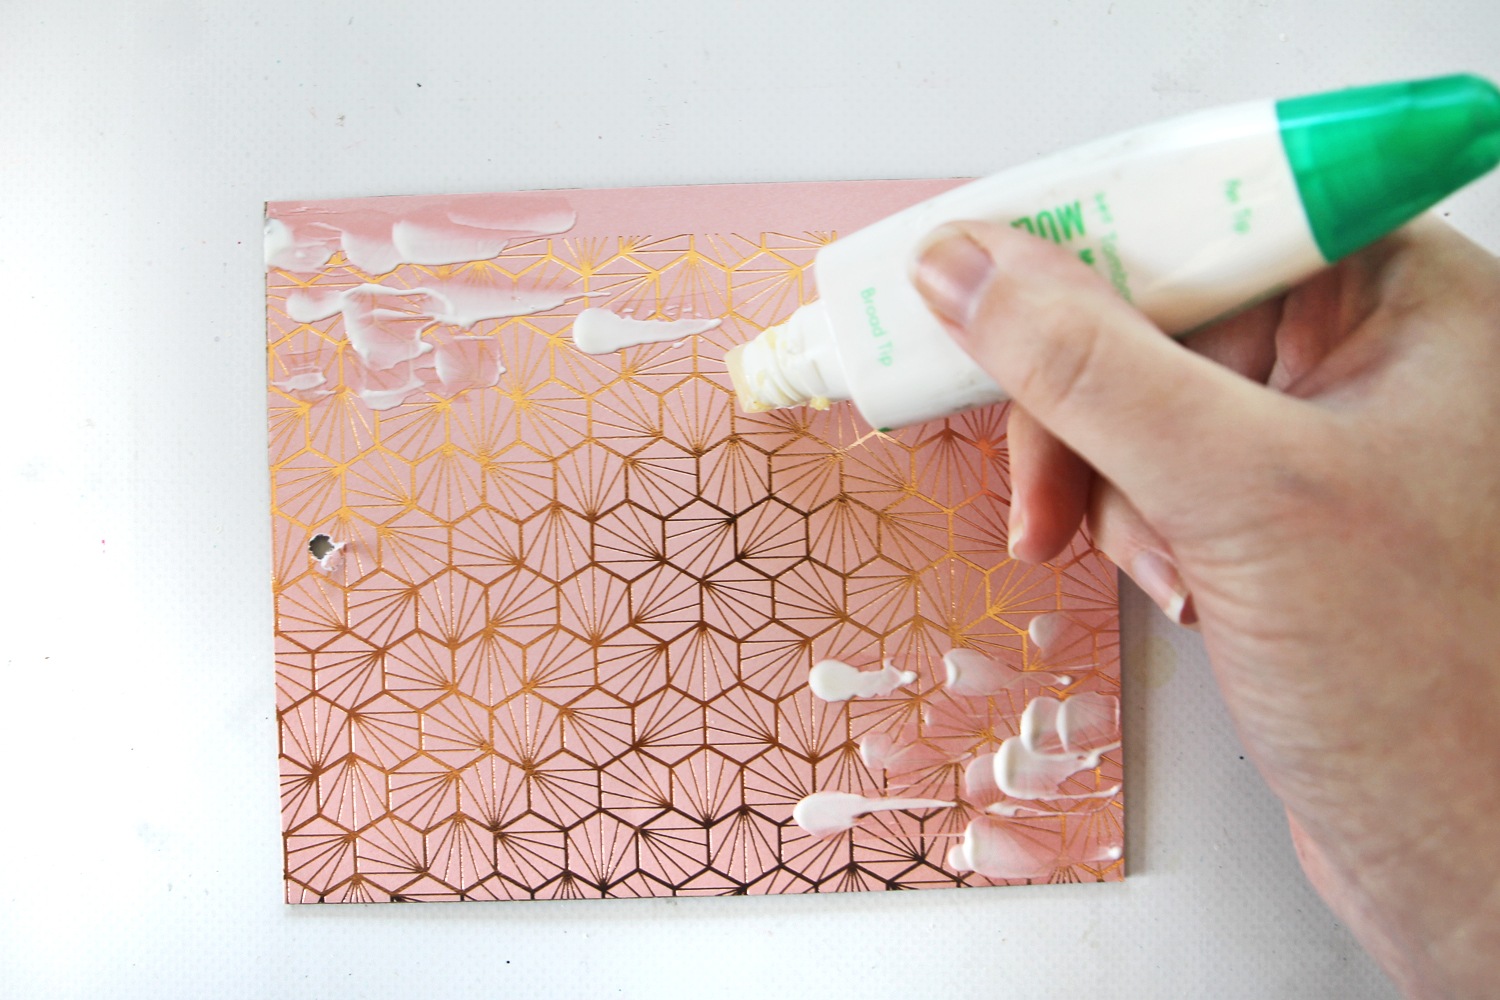 Learn how to add gold foiling to your crafts using @tombowusa MONO Multi Liquid Glue following this tutorial by @studiokatie #tombowusa #tombow #goldfoiling #diy